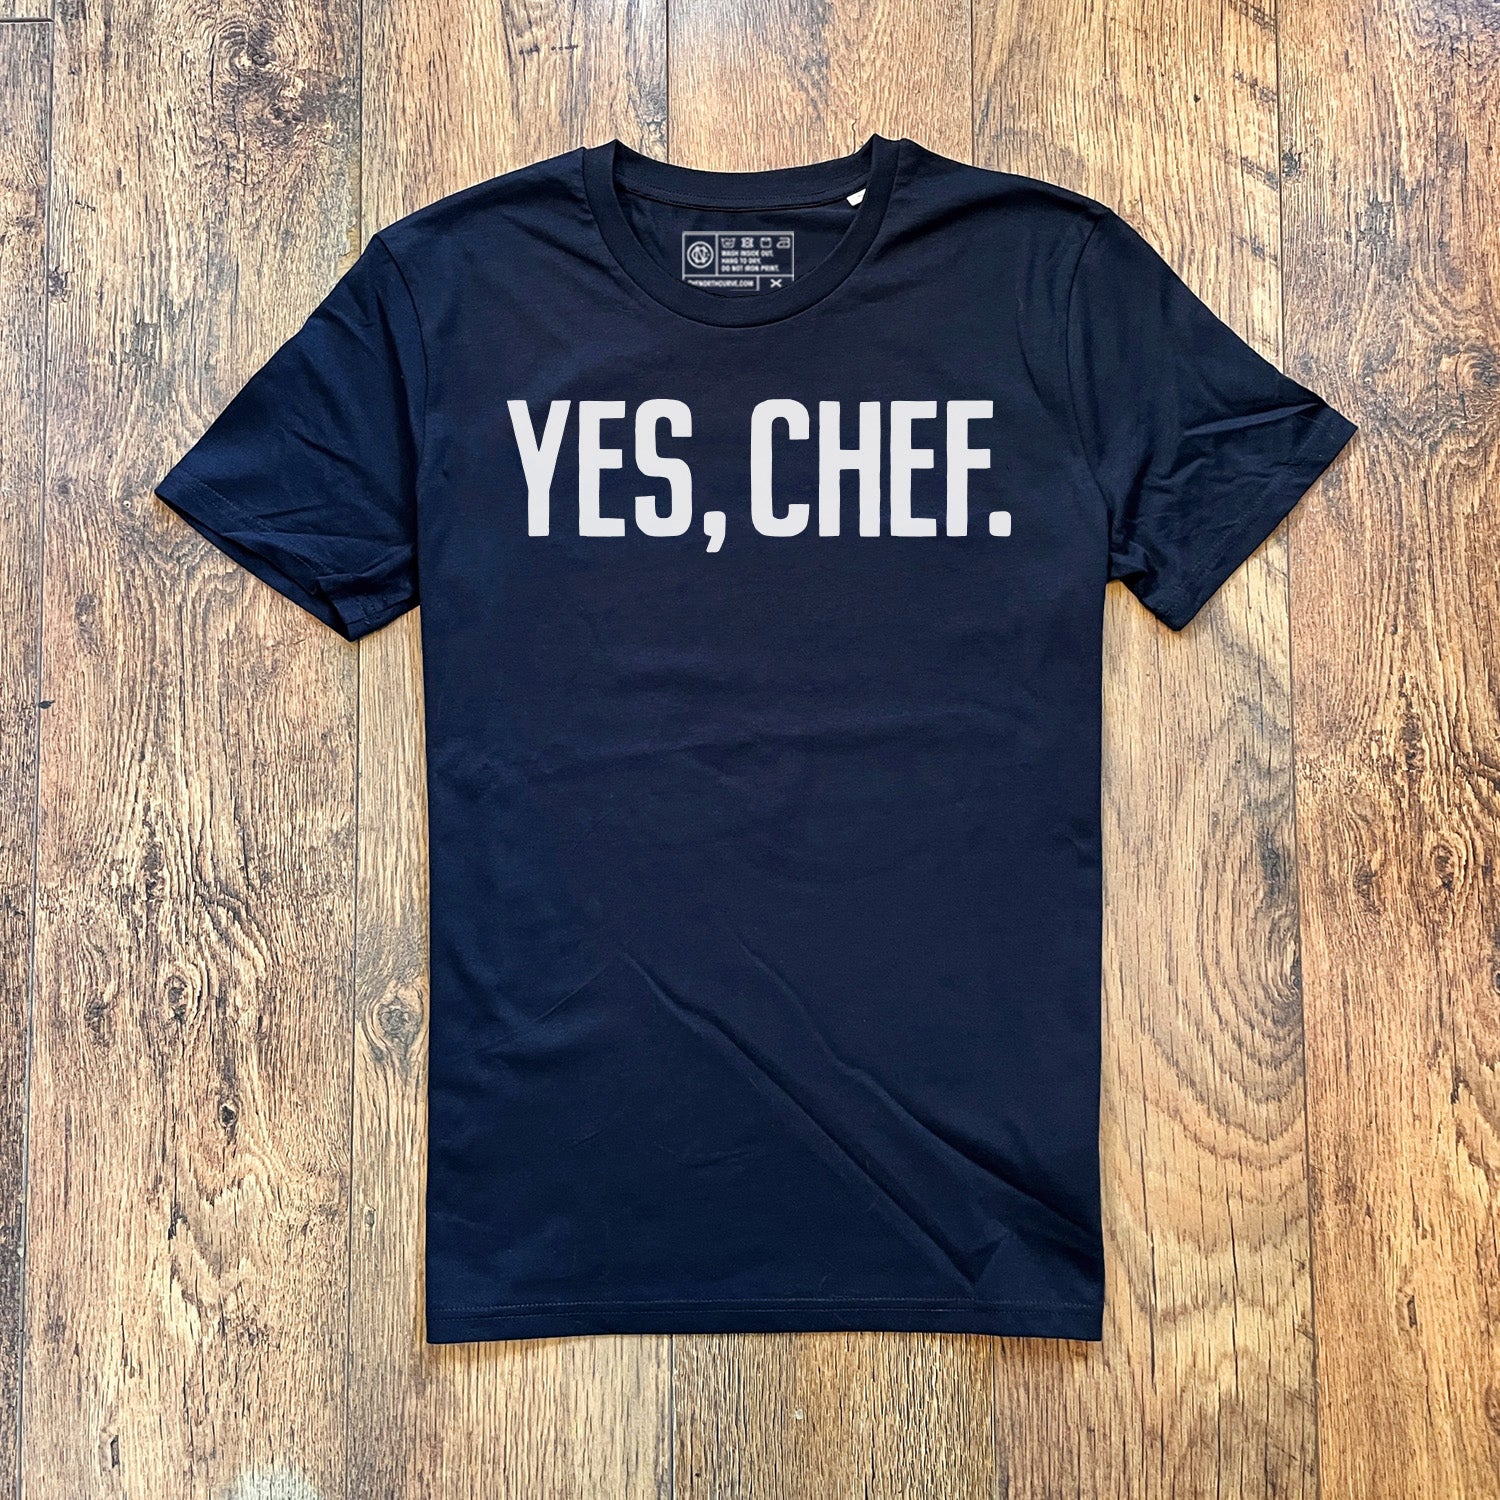 The Bear TV Yes Chef t-shirt